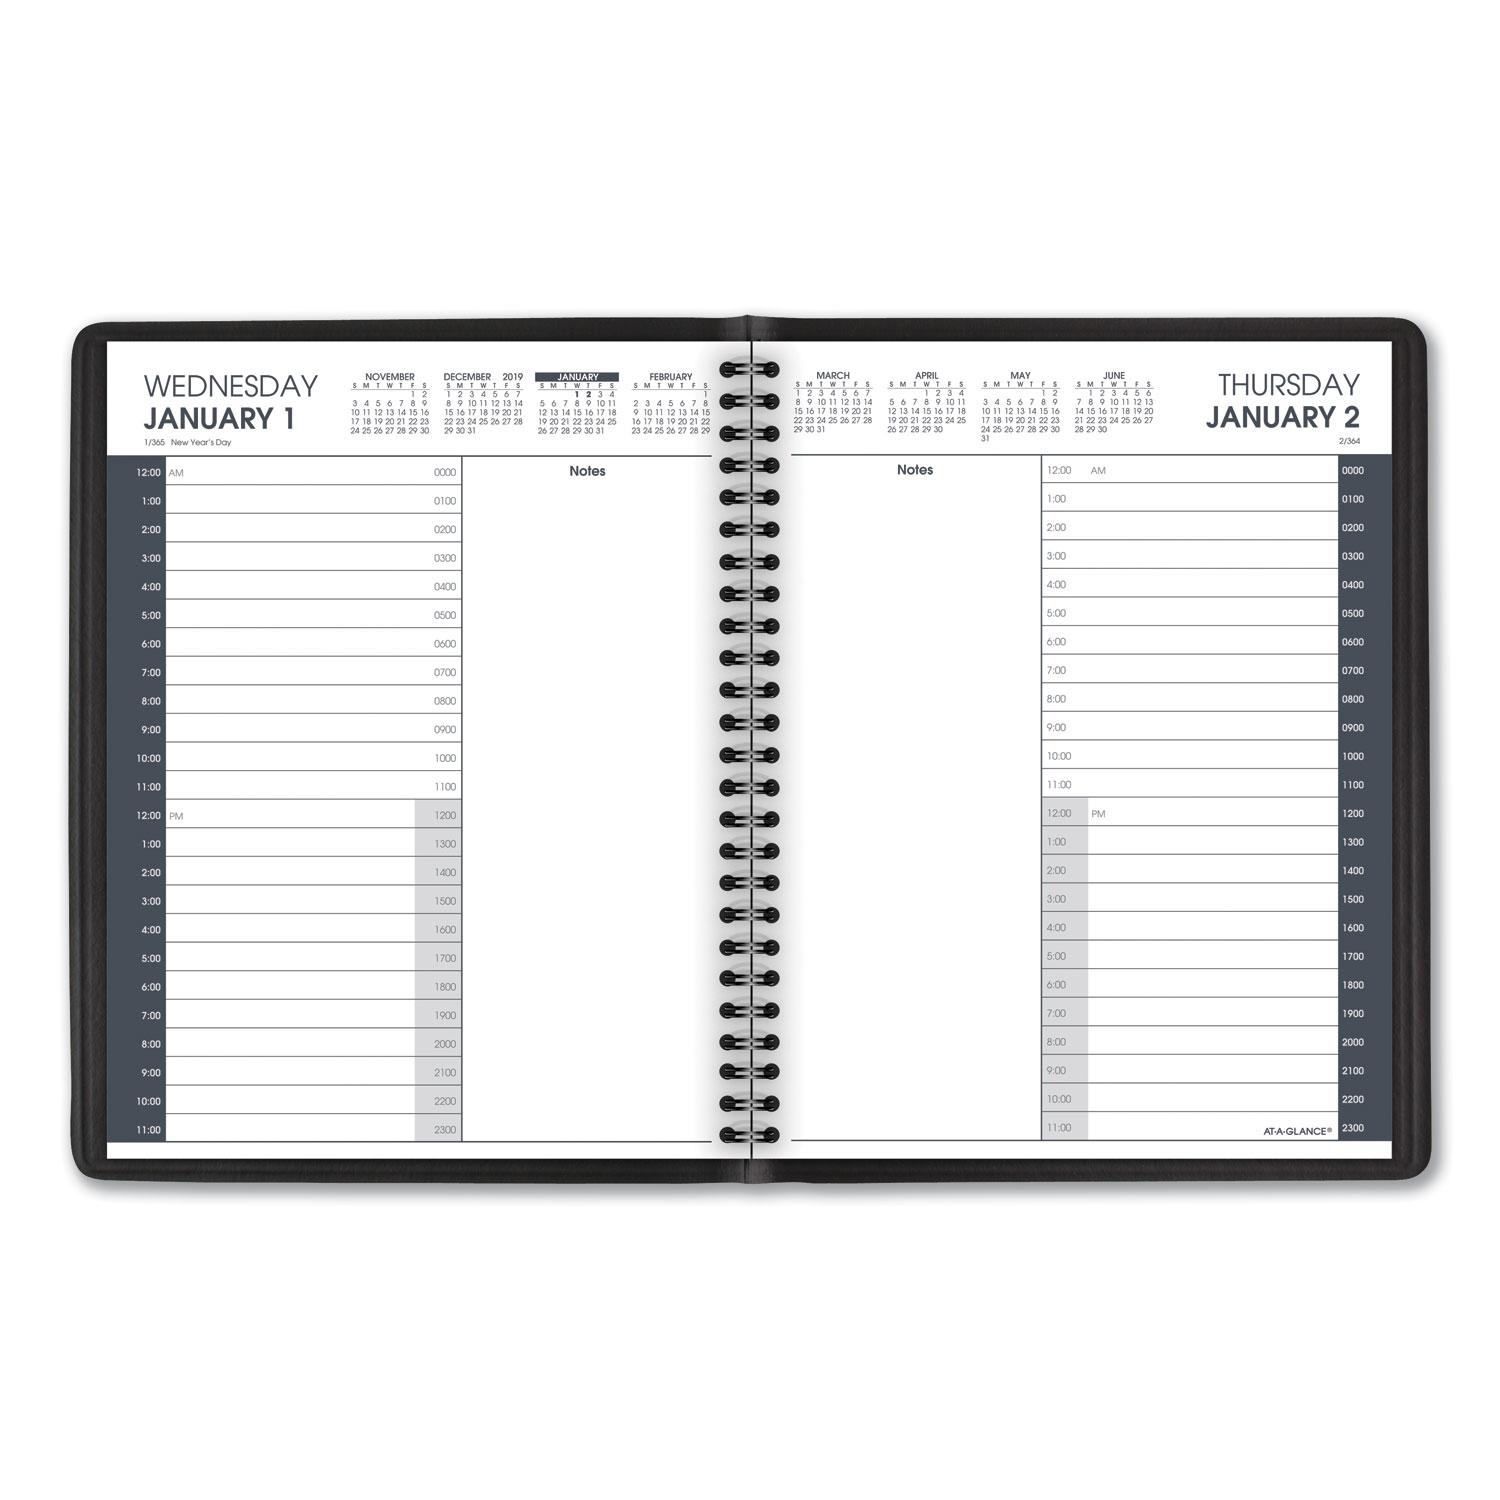 24-Hour Daily Appointment Book, 8 3/4 x 6 7/8, White, 2020